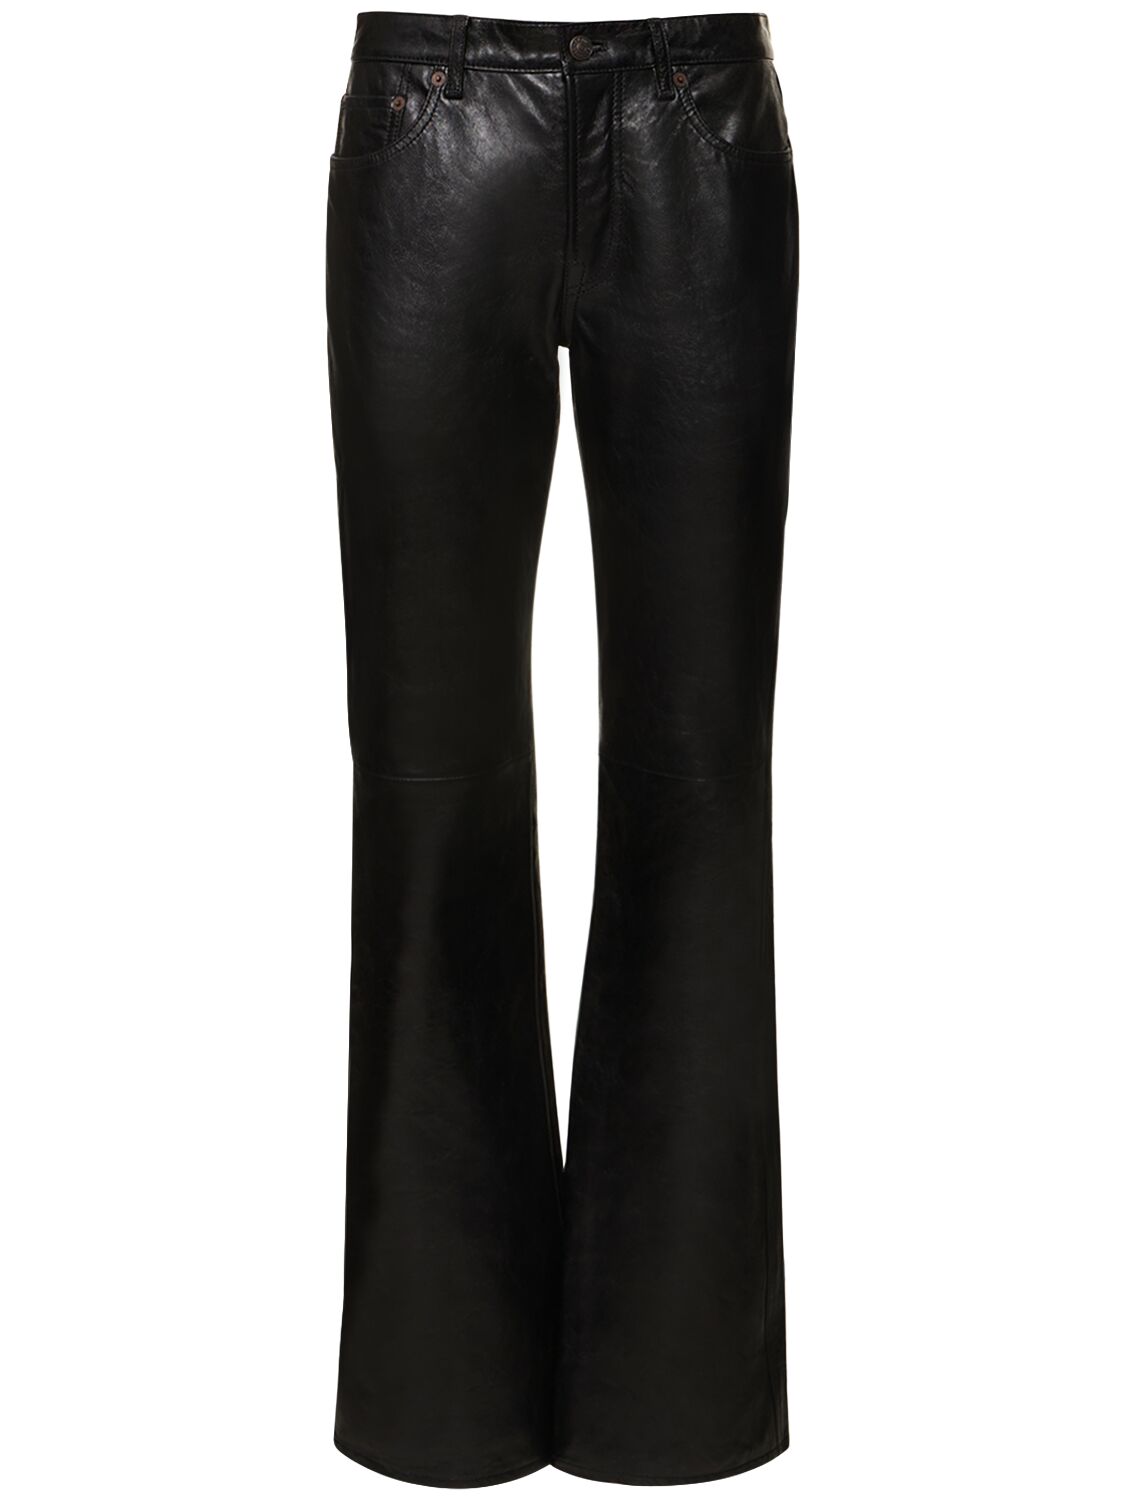 Black Lios flared leather trousers, Acne Studios